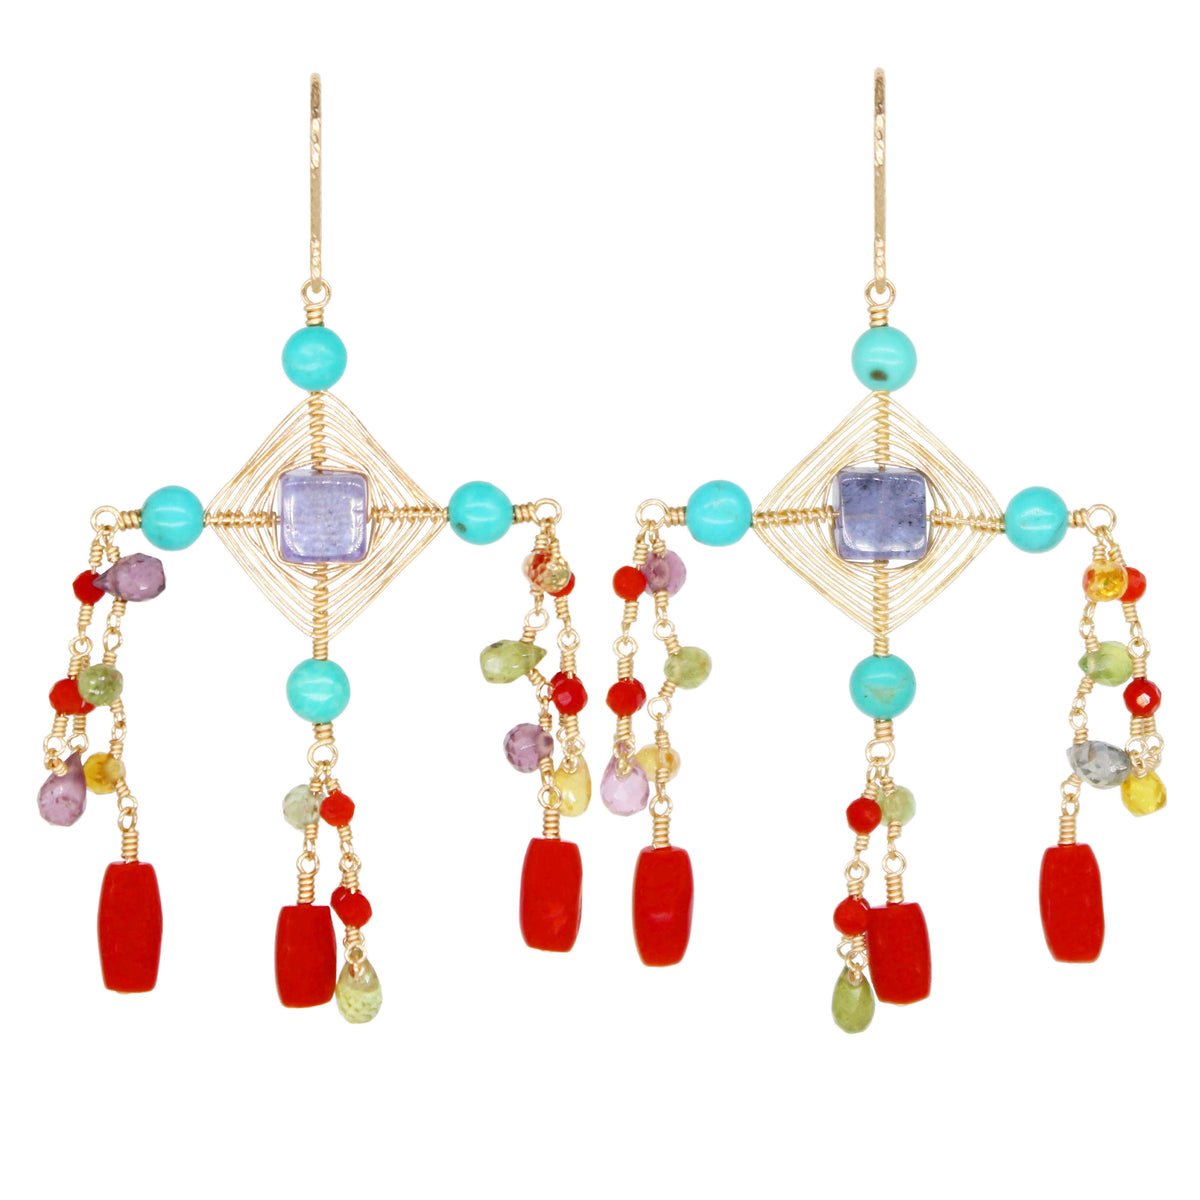 Woven turquoise, coral and sapphire earring in gold.